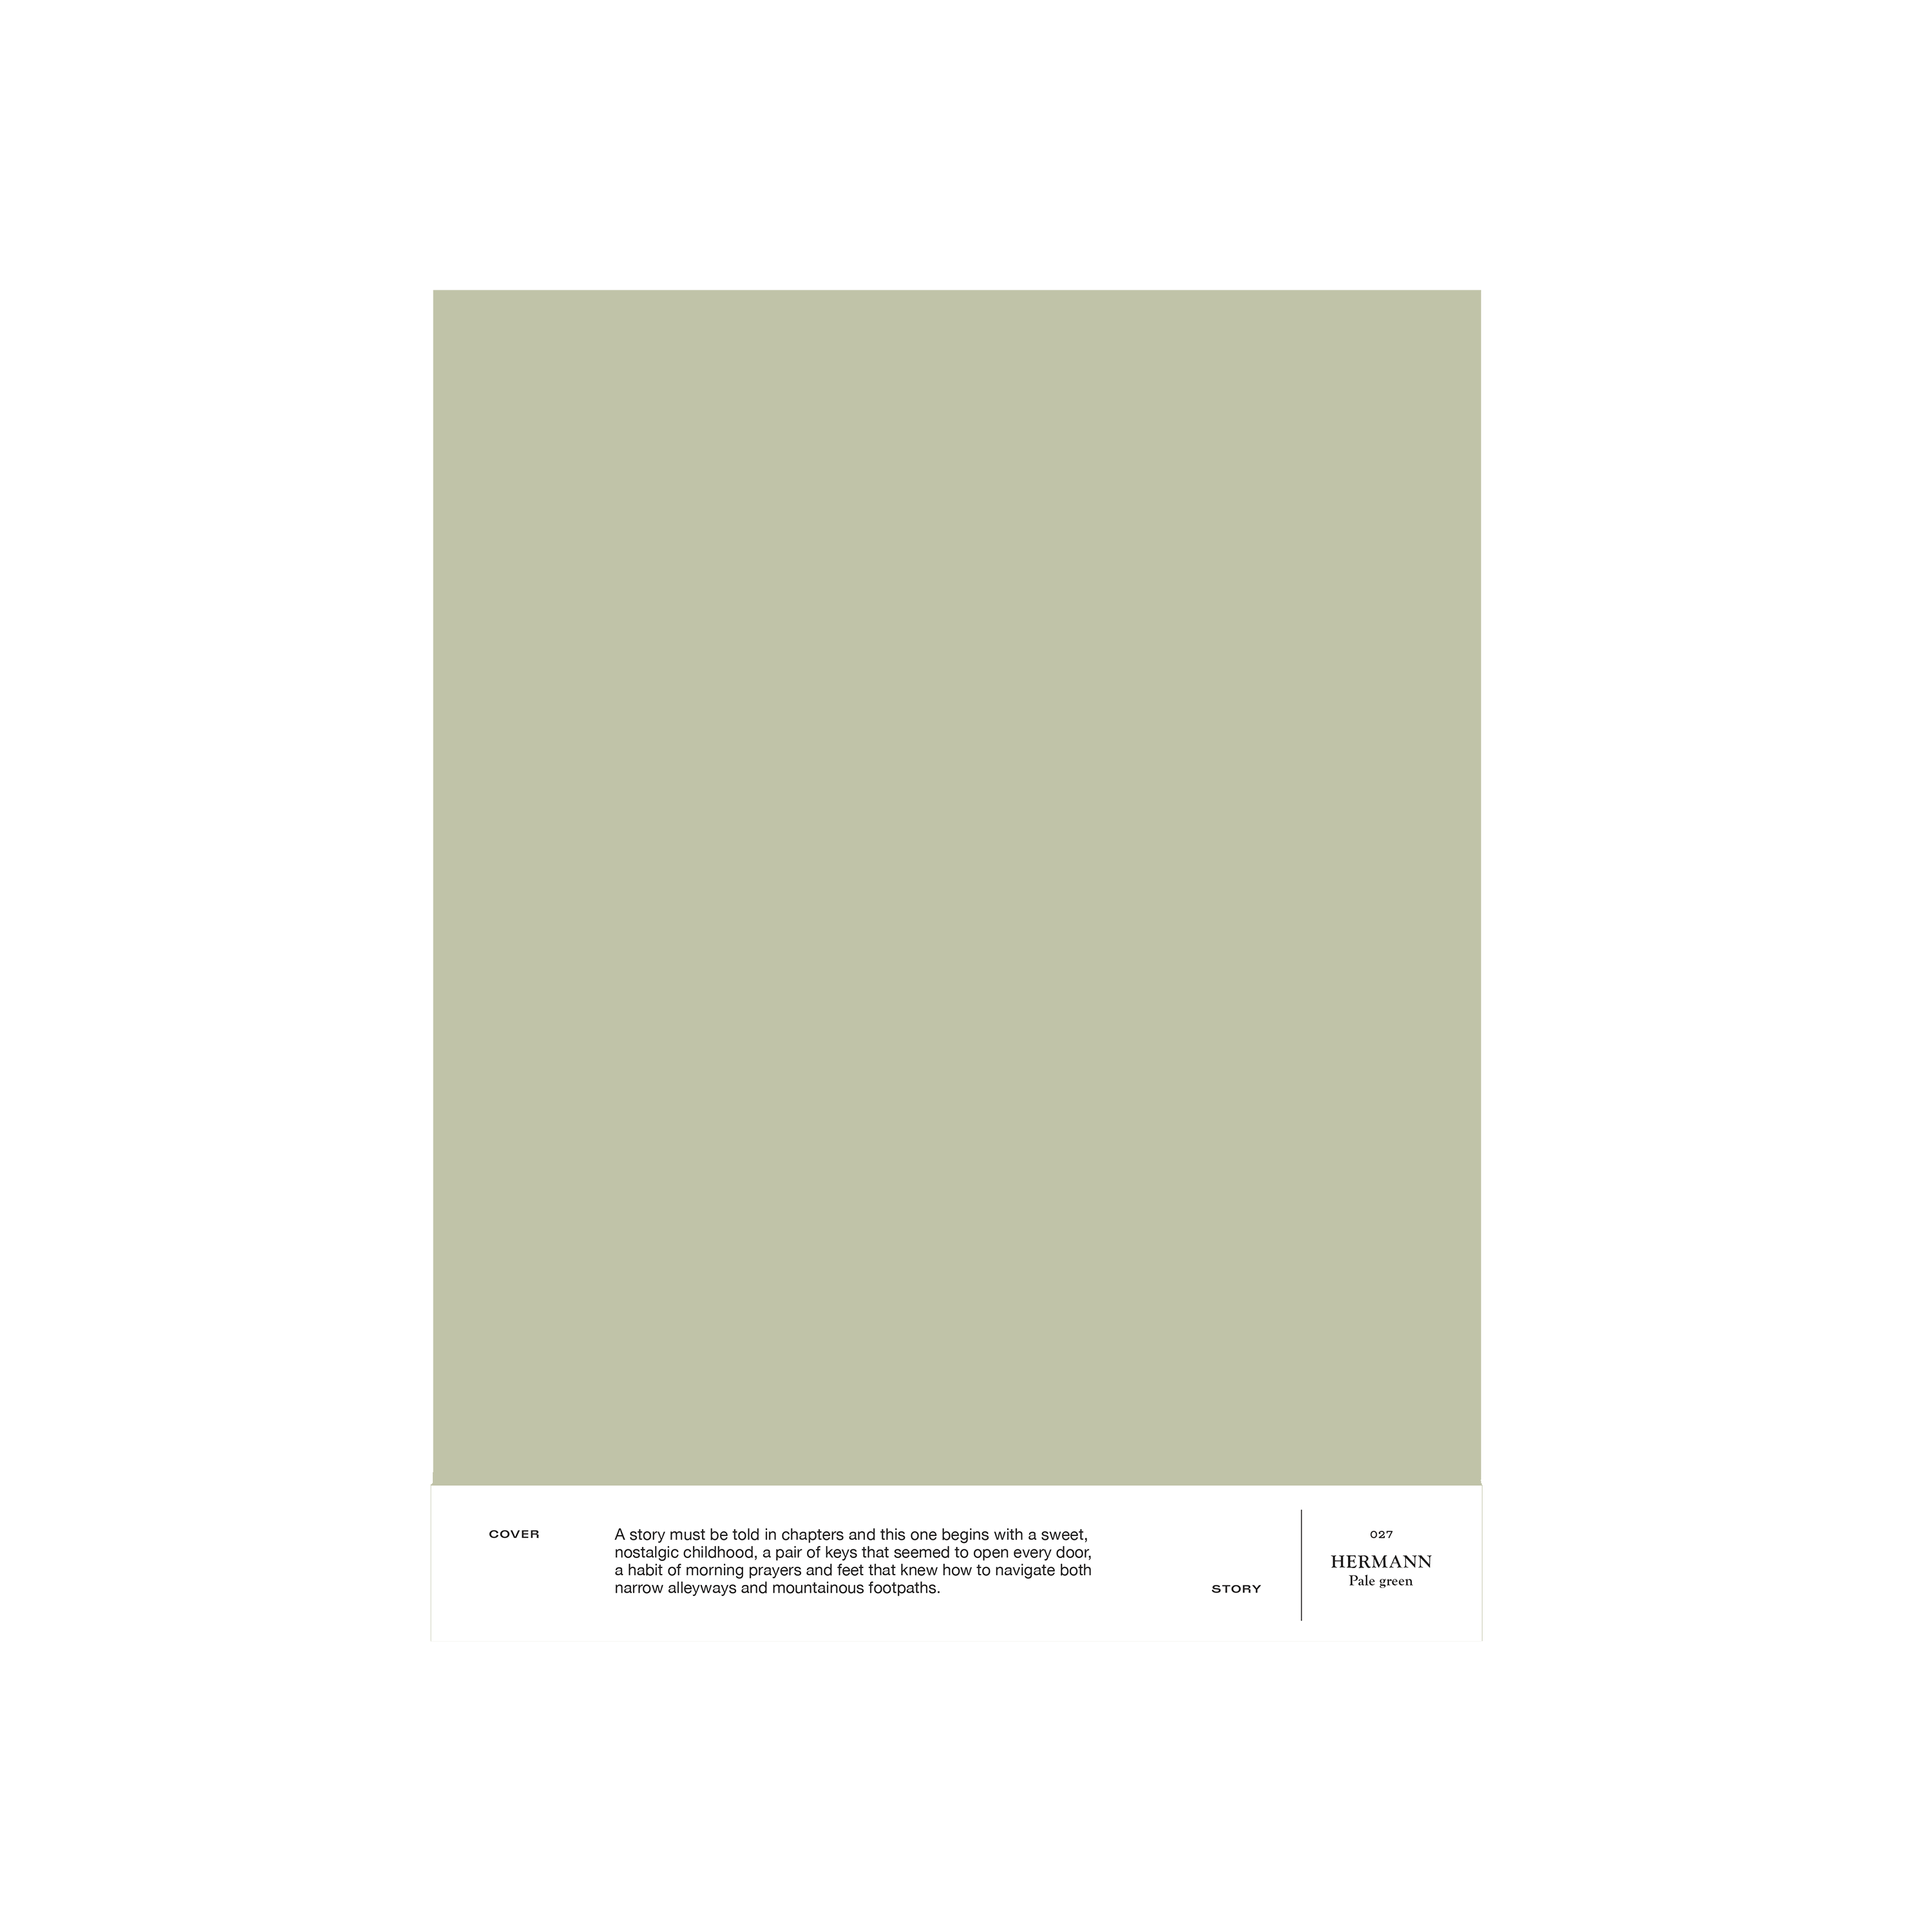 Pale green interior paint Cover Story 027 HERMANN